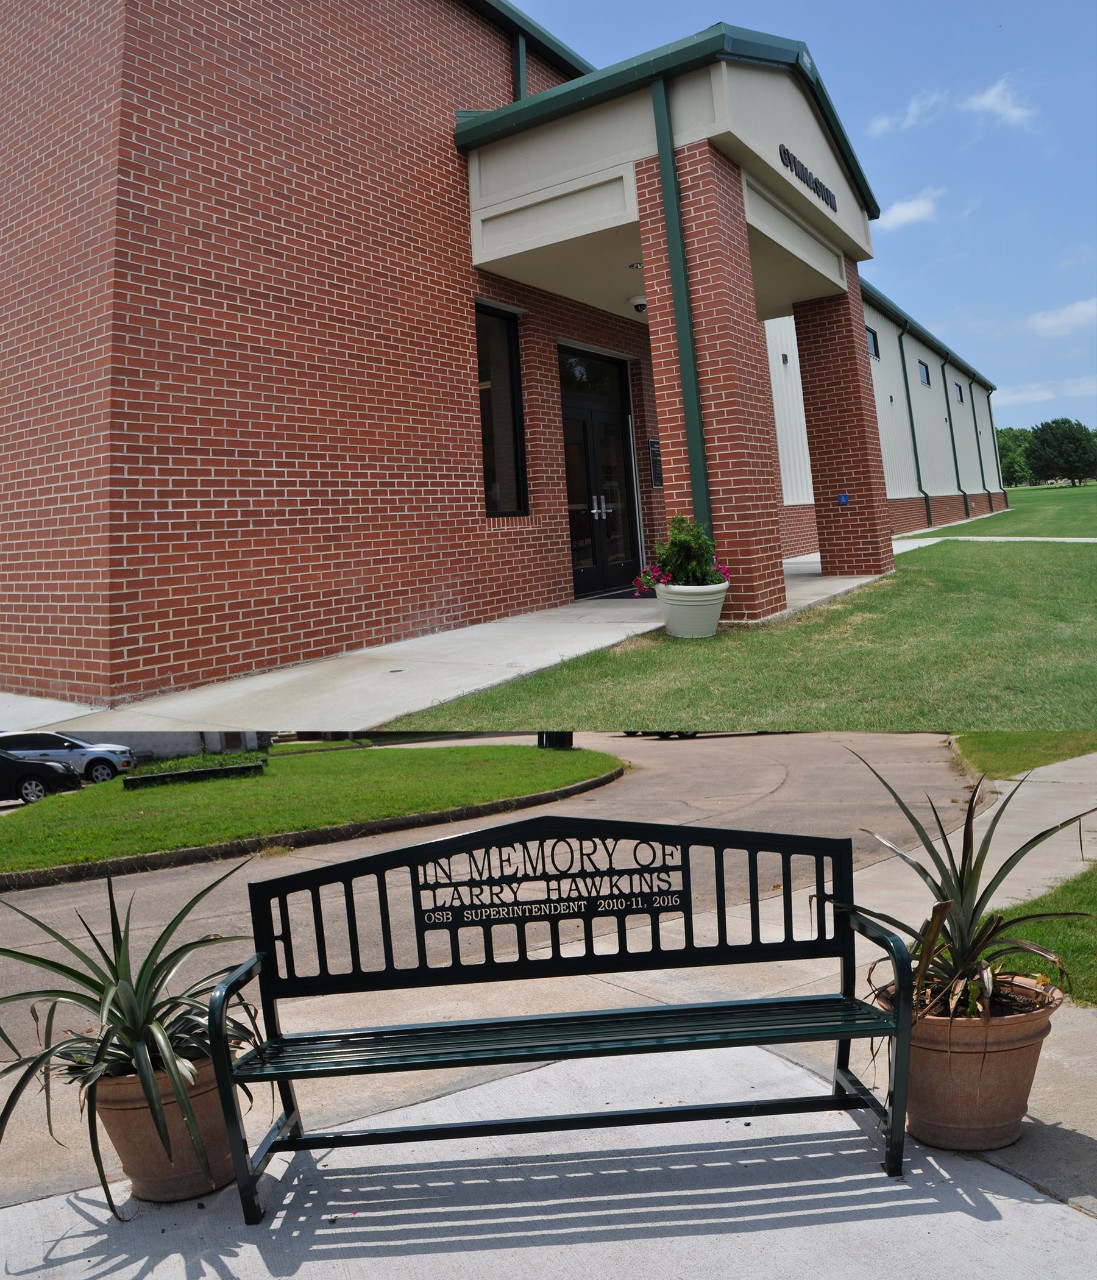 Entrance to brick building. Sign on bench: In Memory of Larry Hawkins.